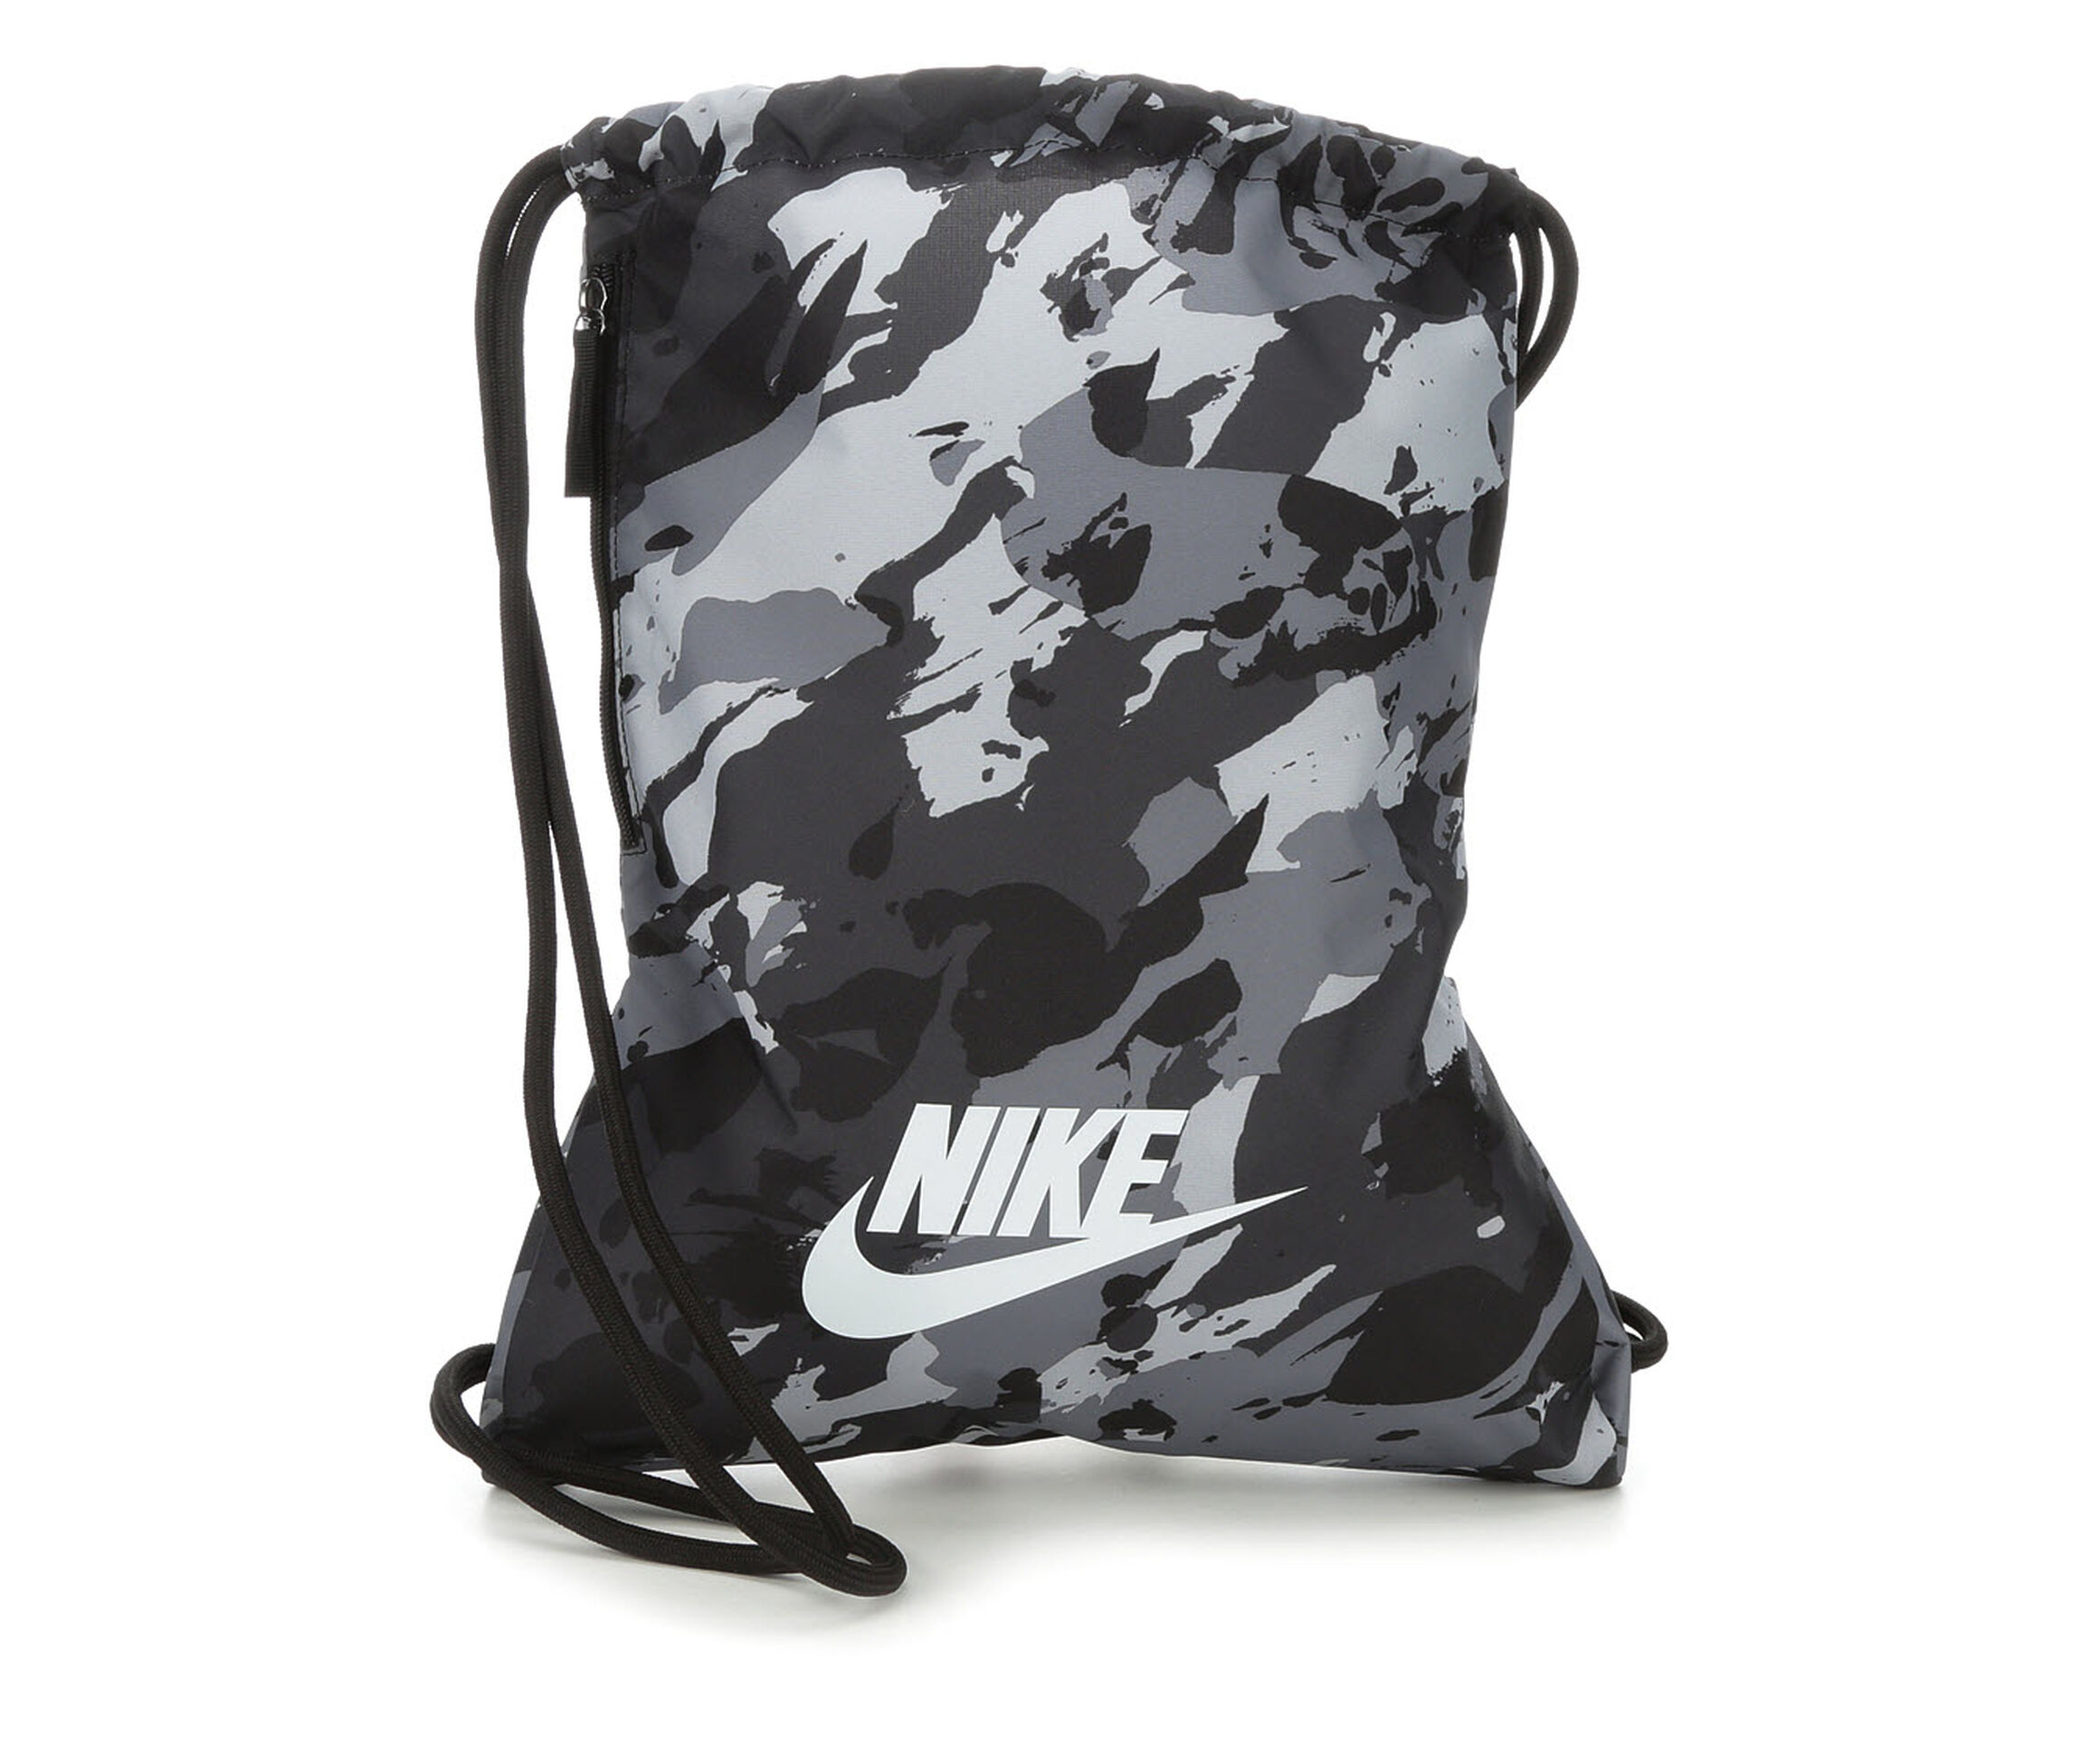 Drawstring and Cinch Bags